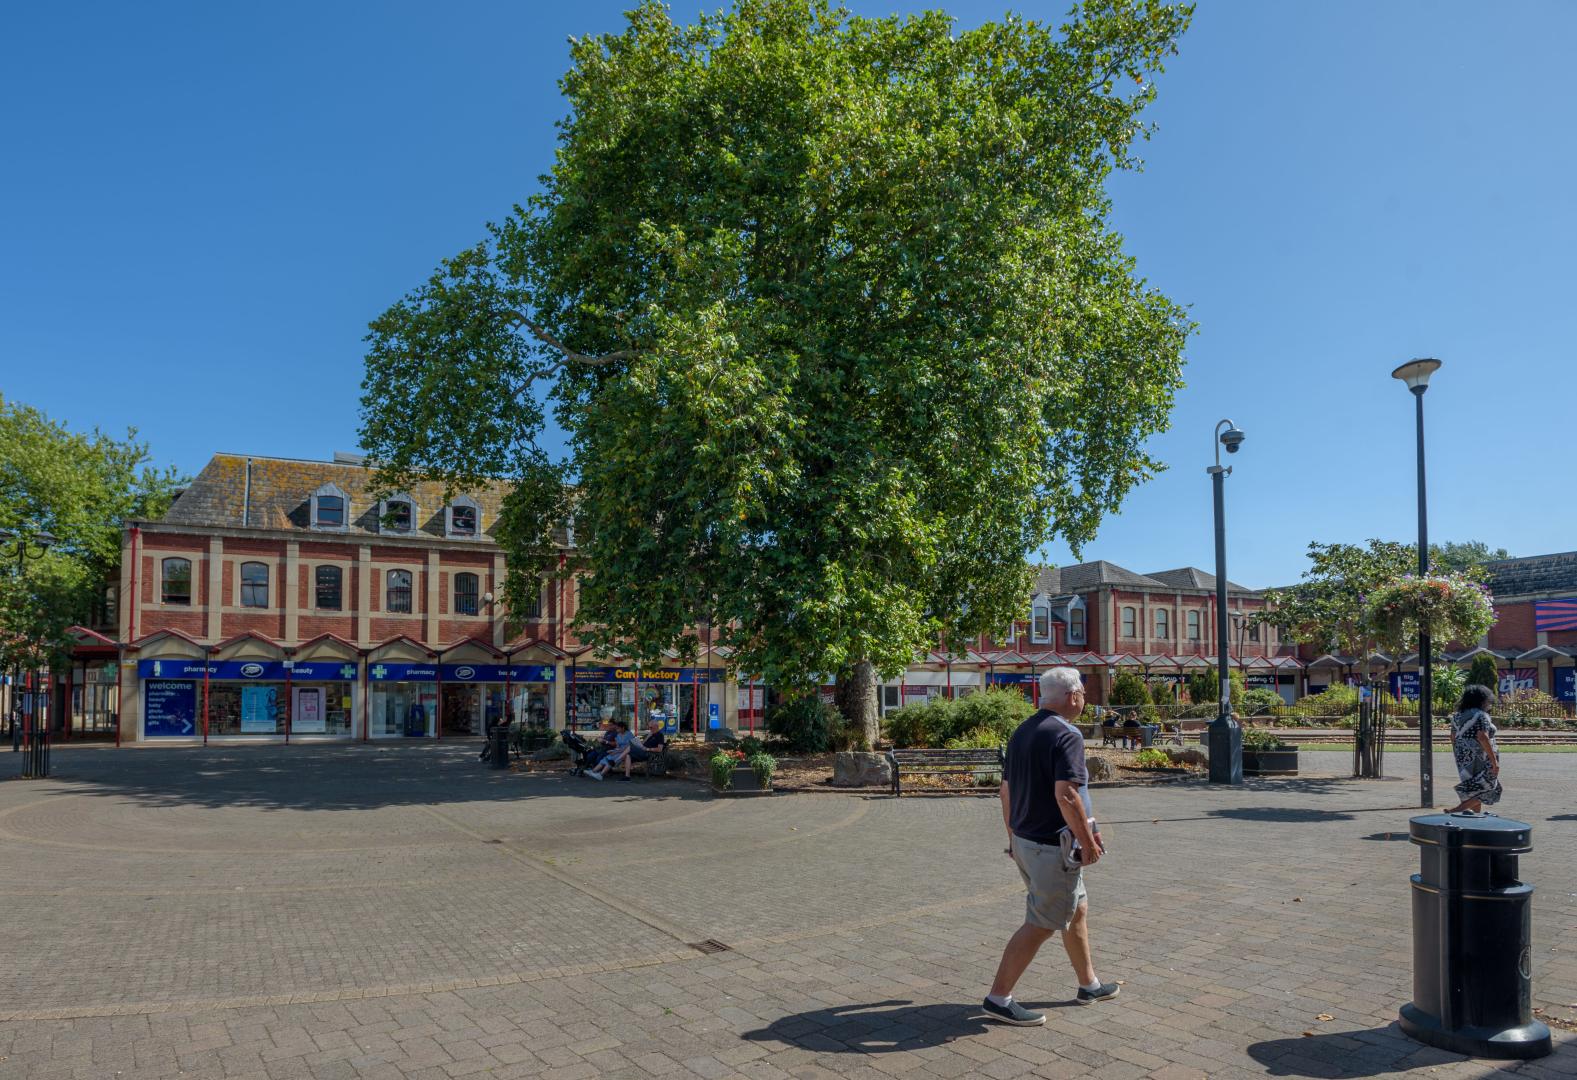 A photo of Queen's Square in Clevedon